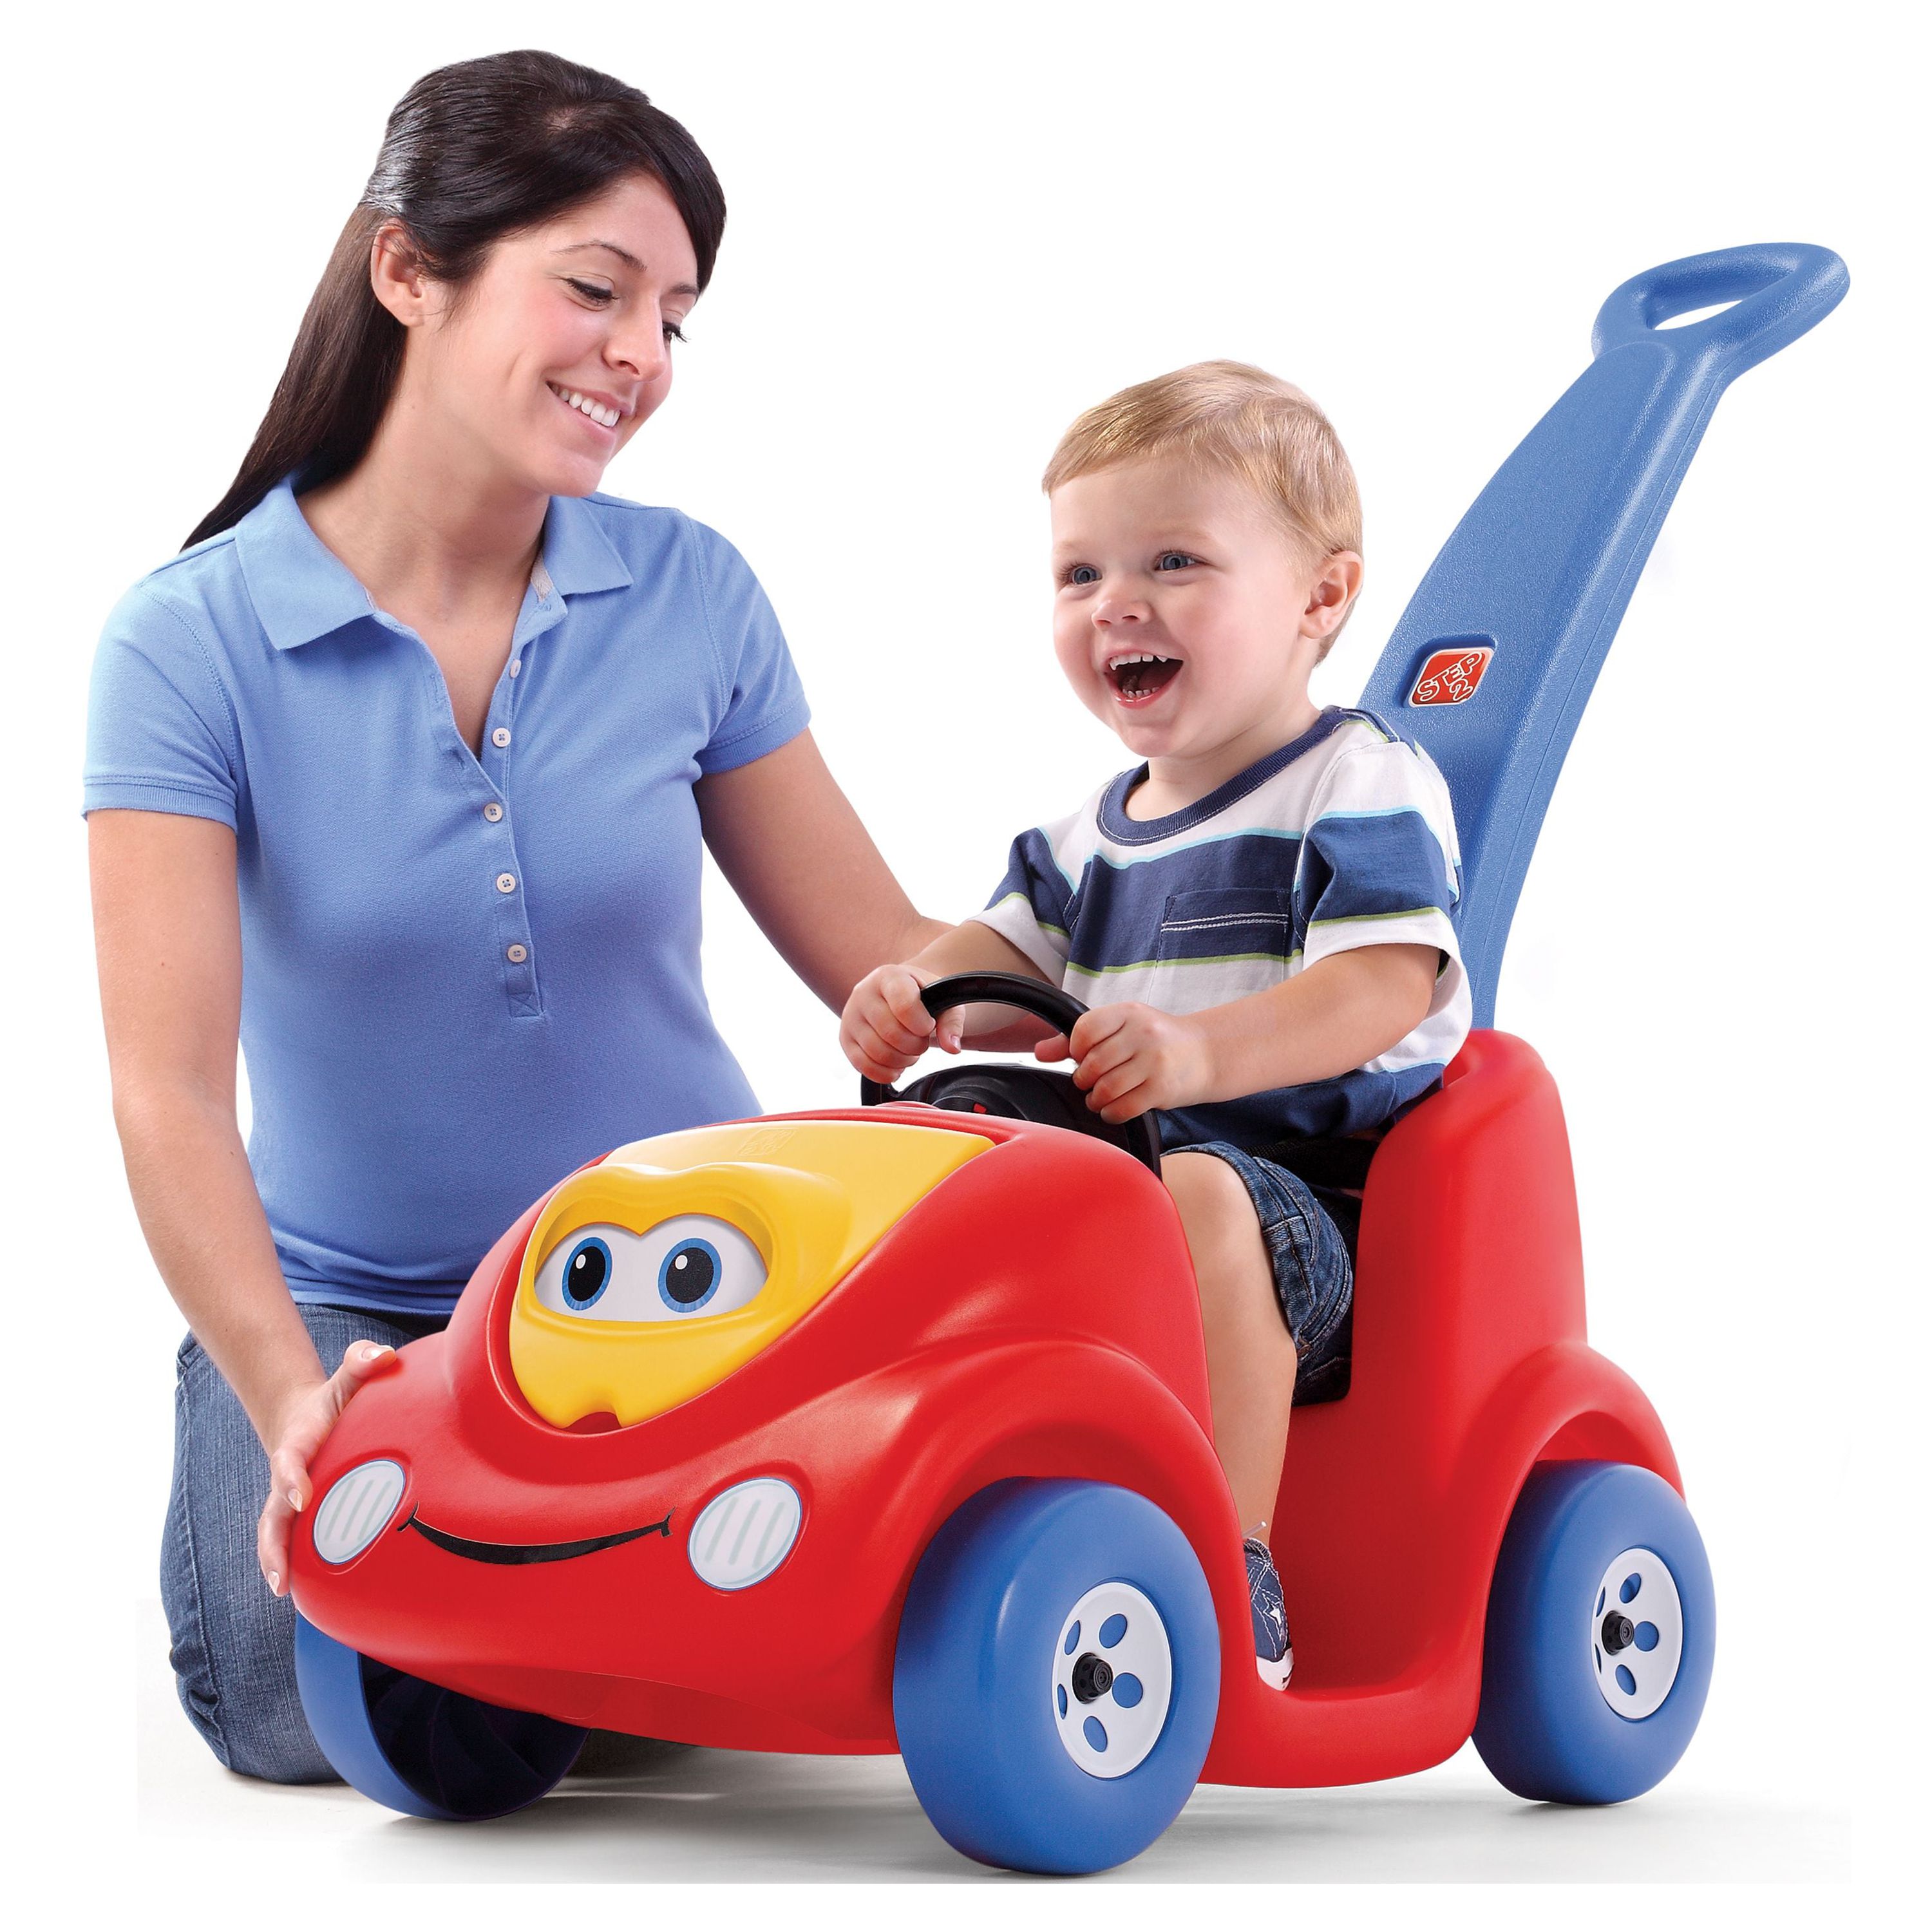 Step2 Push Around Buggy Red 10th Anniversary Edition Push Car and Ride on Toys for Toddlers - image 3 of 6